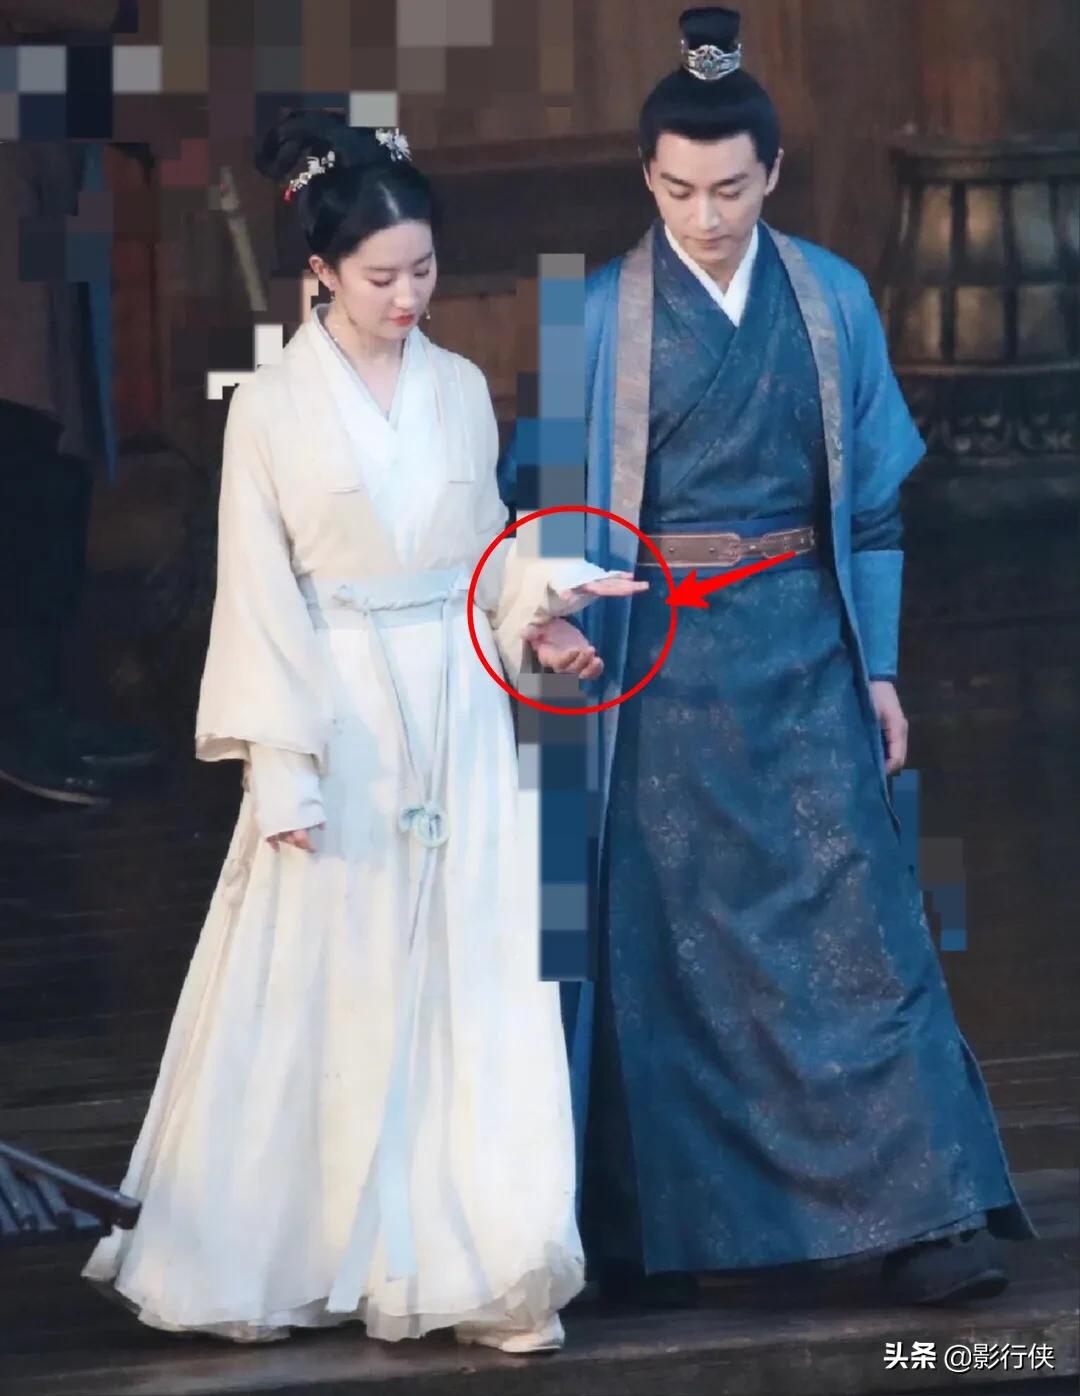 Liu Yifei Chen Xiao pulls lack practice and skill to pursue by mad pass, after losing division of 1 million long pictures, didn't I misread this Yan Zhi? 